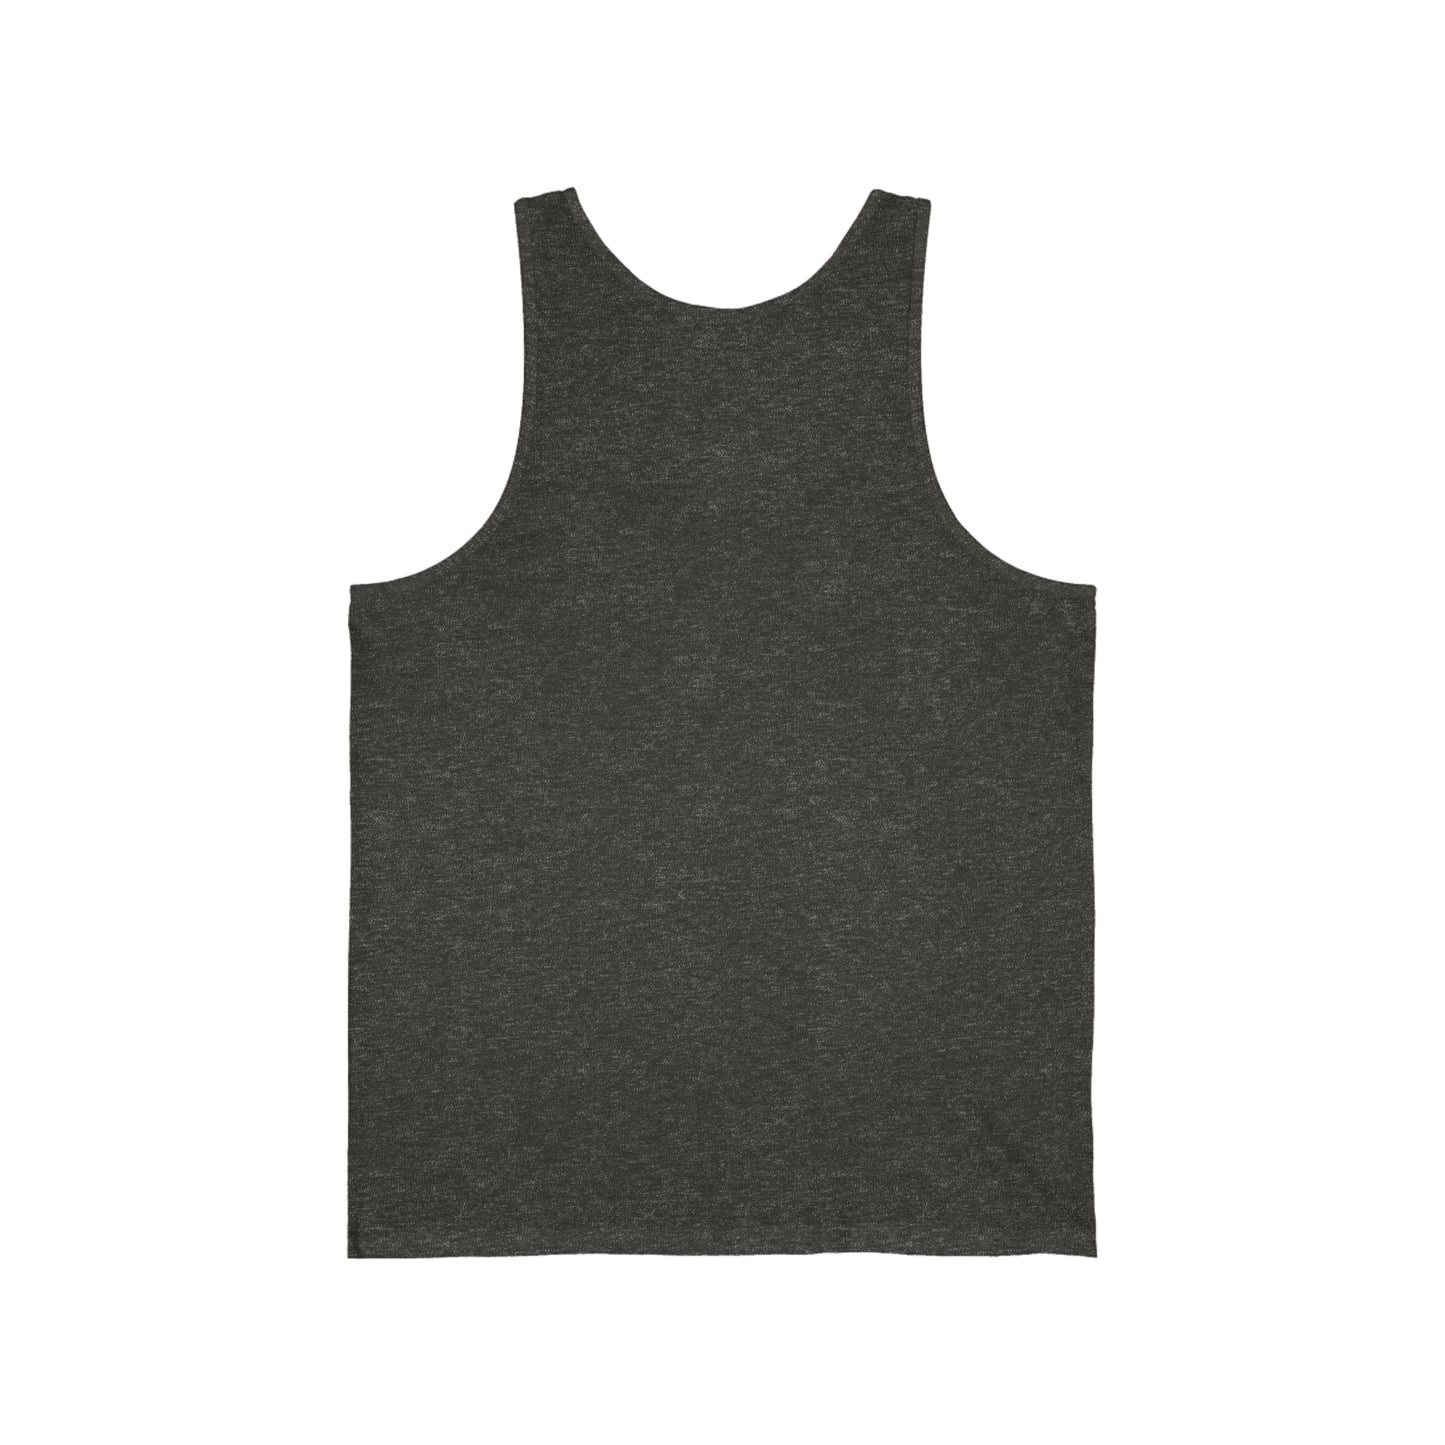 Do You Need A Cuddle? Unisex Jersey Tank